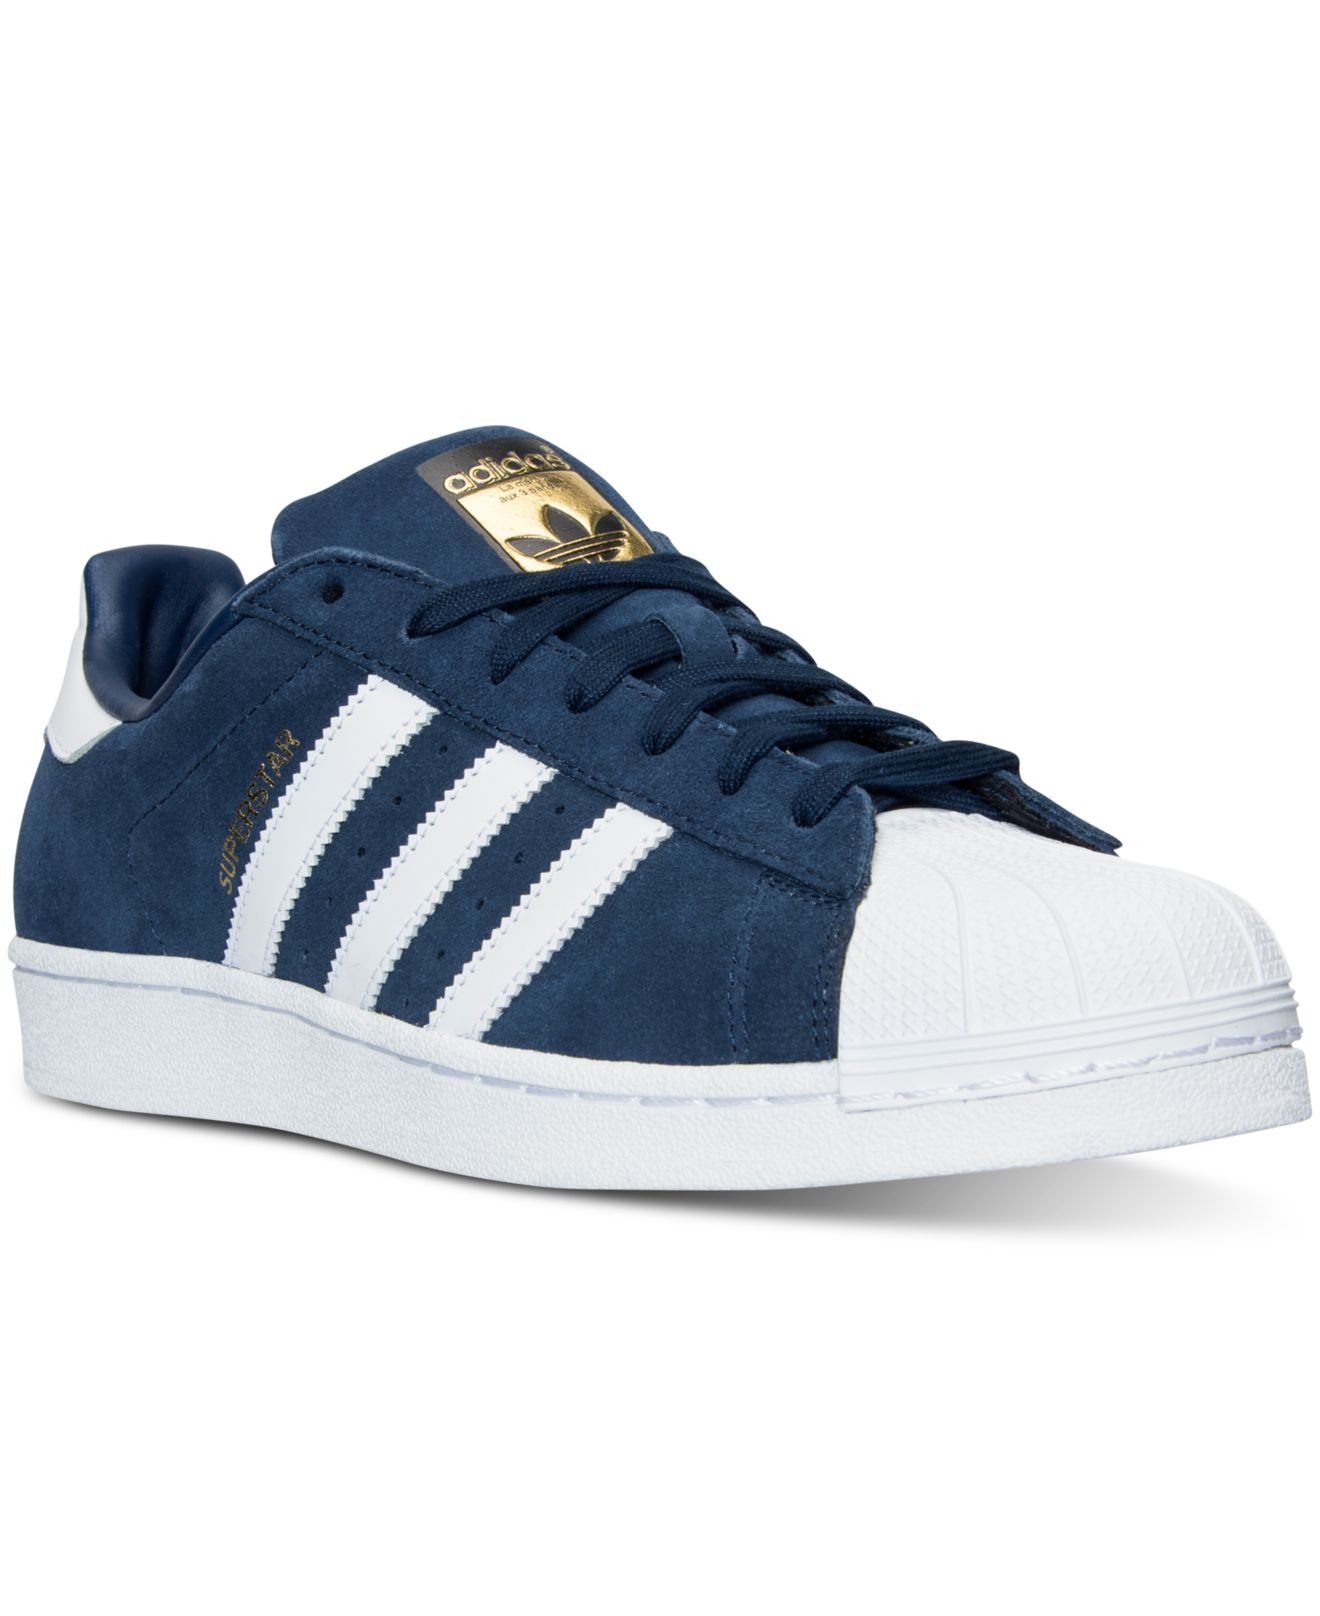 adidas Originals Leather Men's Superstar Casual Sneakers From Finish